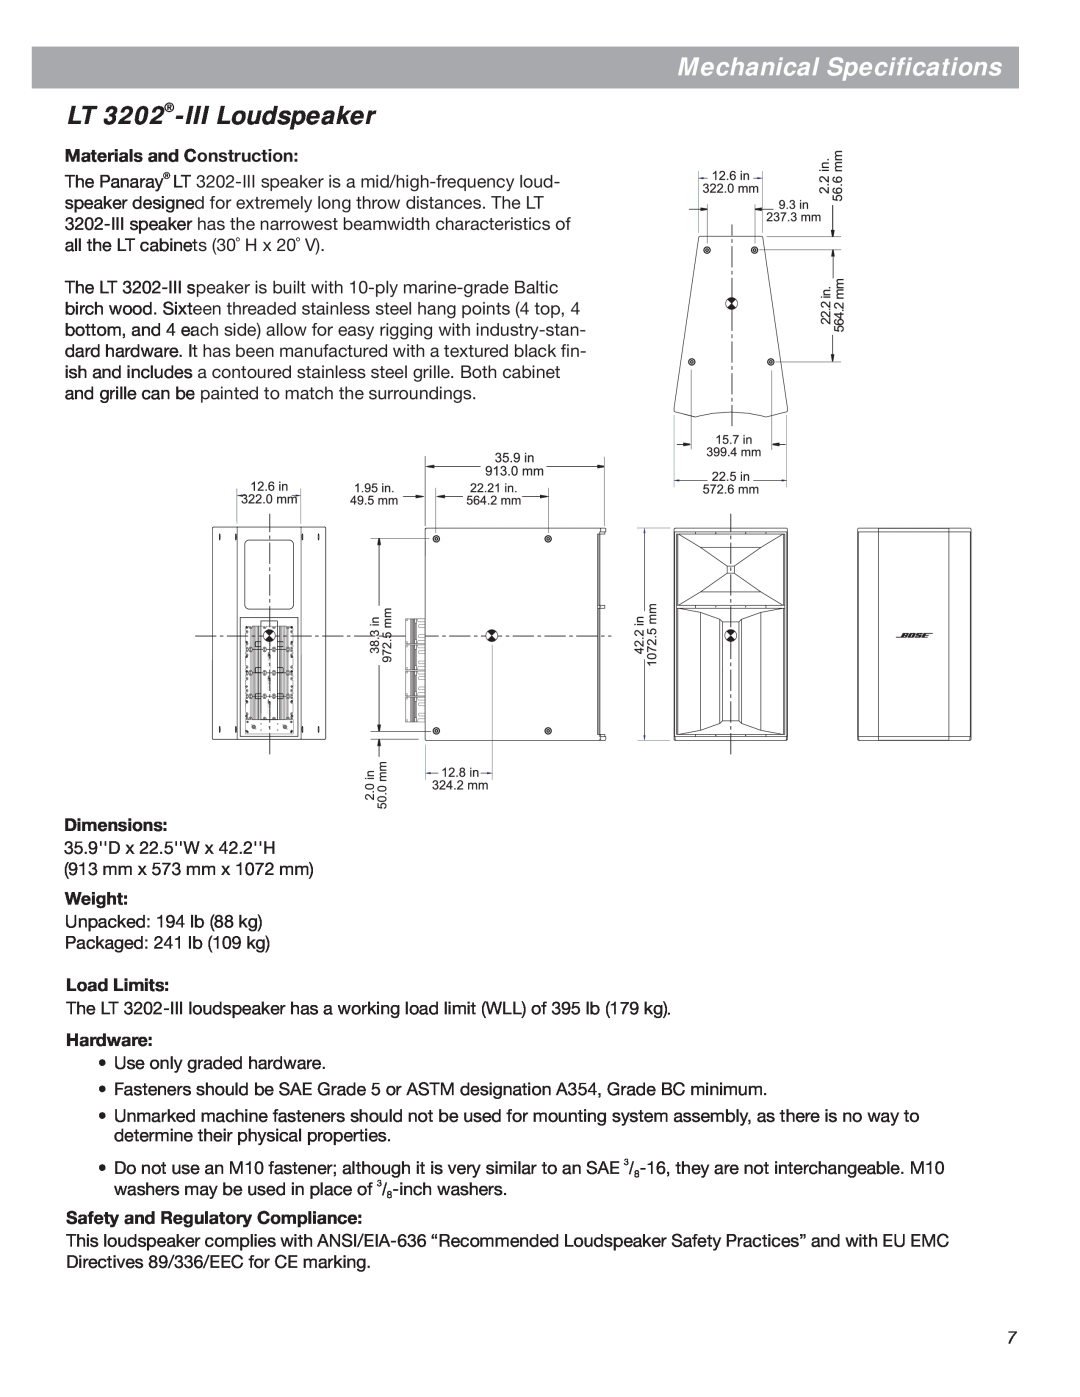 Bose Bose Panaray Loudspeakers Mechanical Specifications, LT 3202-IIILoudspeaker, Materials and Construction, Dimensions 